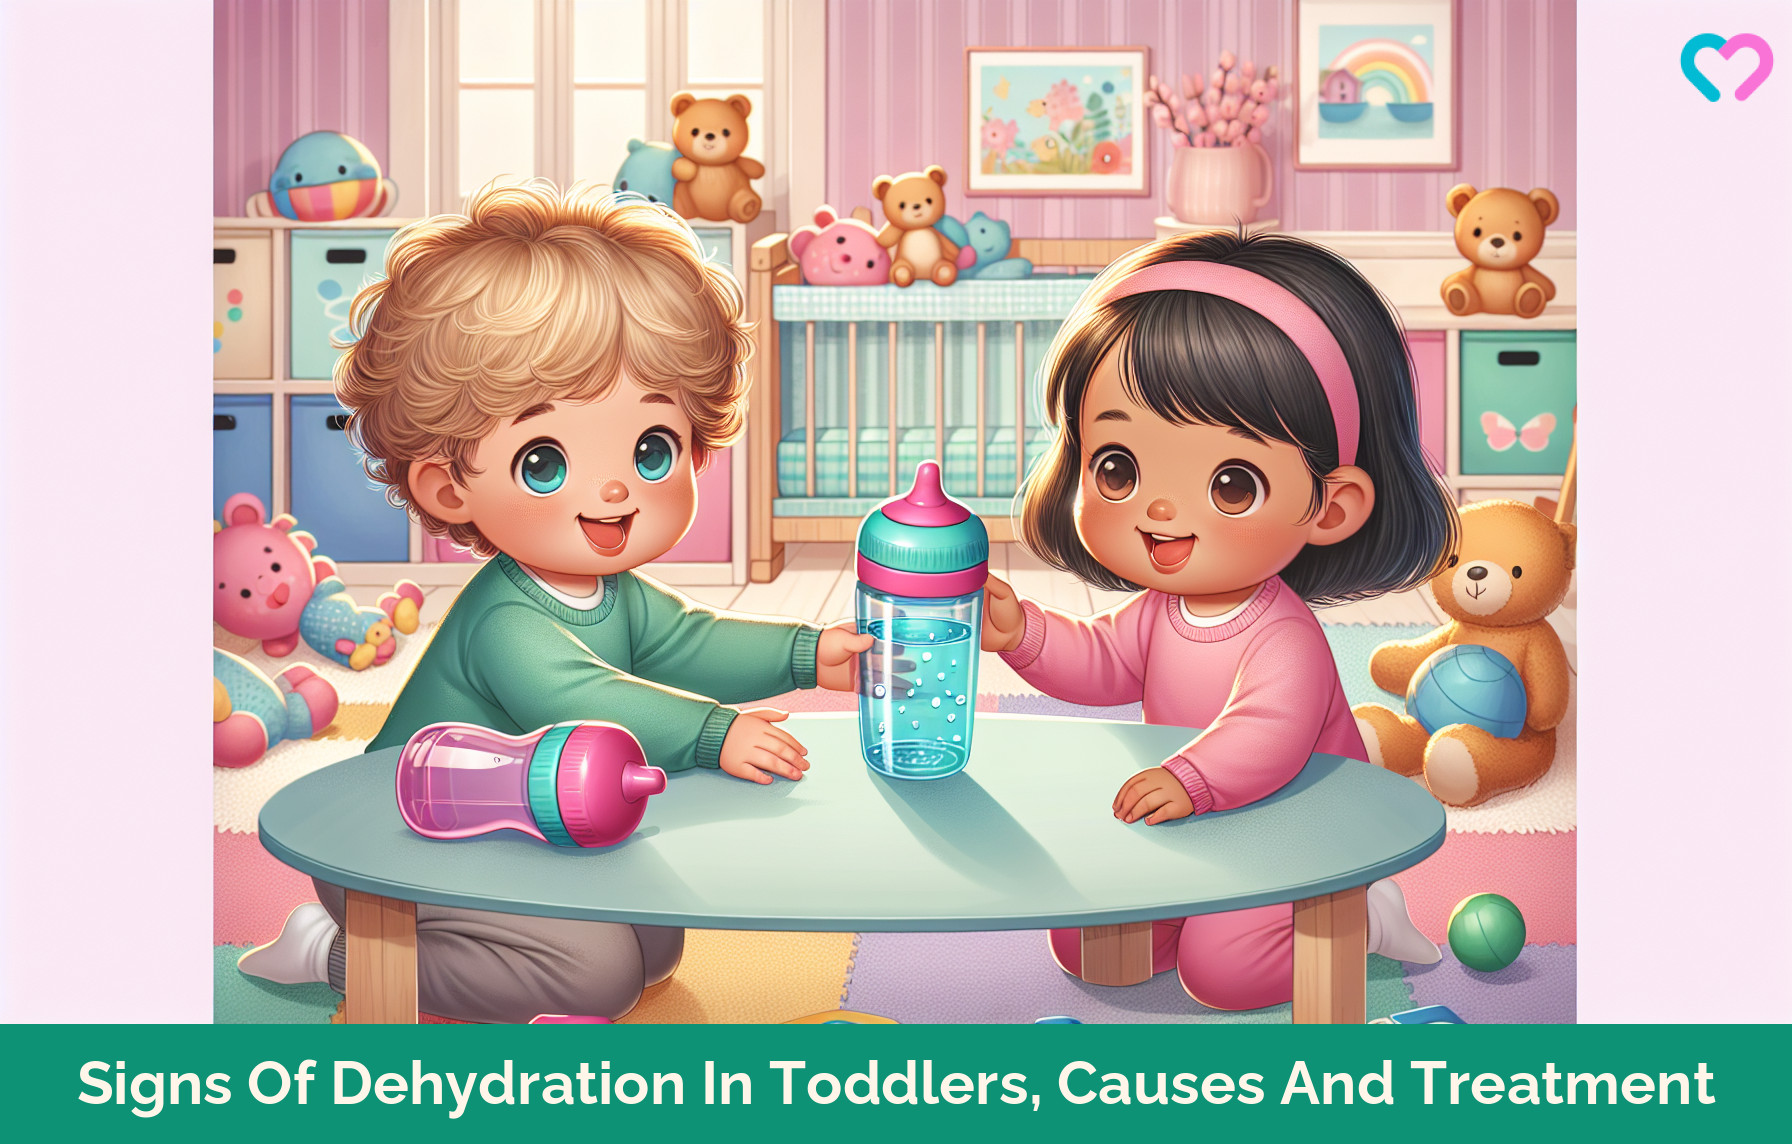 Dehydration In Toddlers_illustration